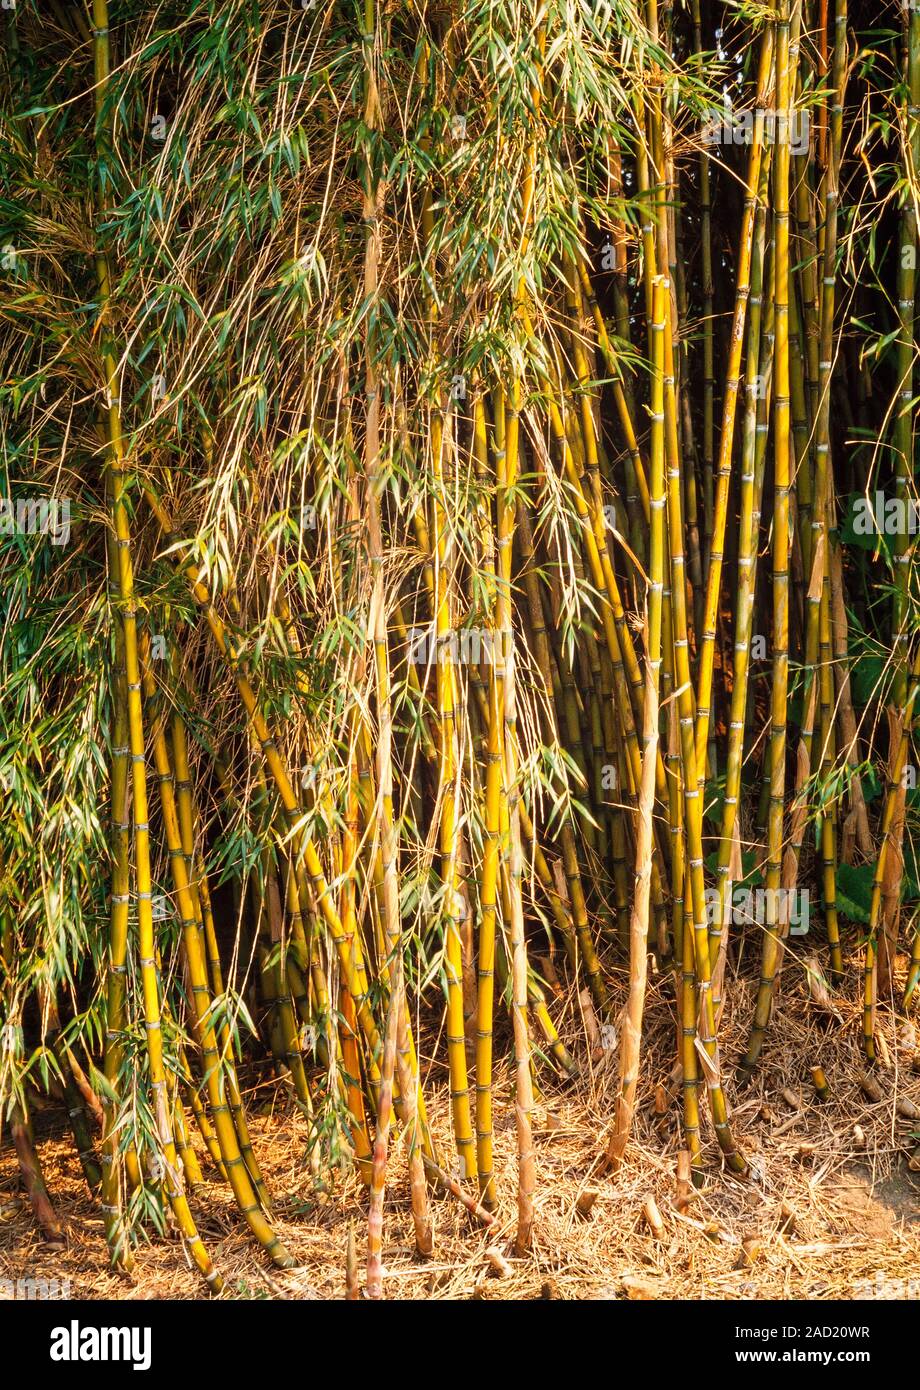 A stand of bamboo grass, Arundinaria sp. One of natures fastest growing plants, up to i metre per day is possible. Stock Photo